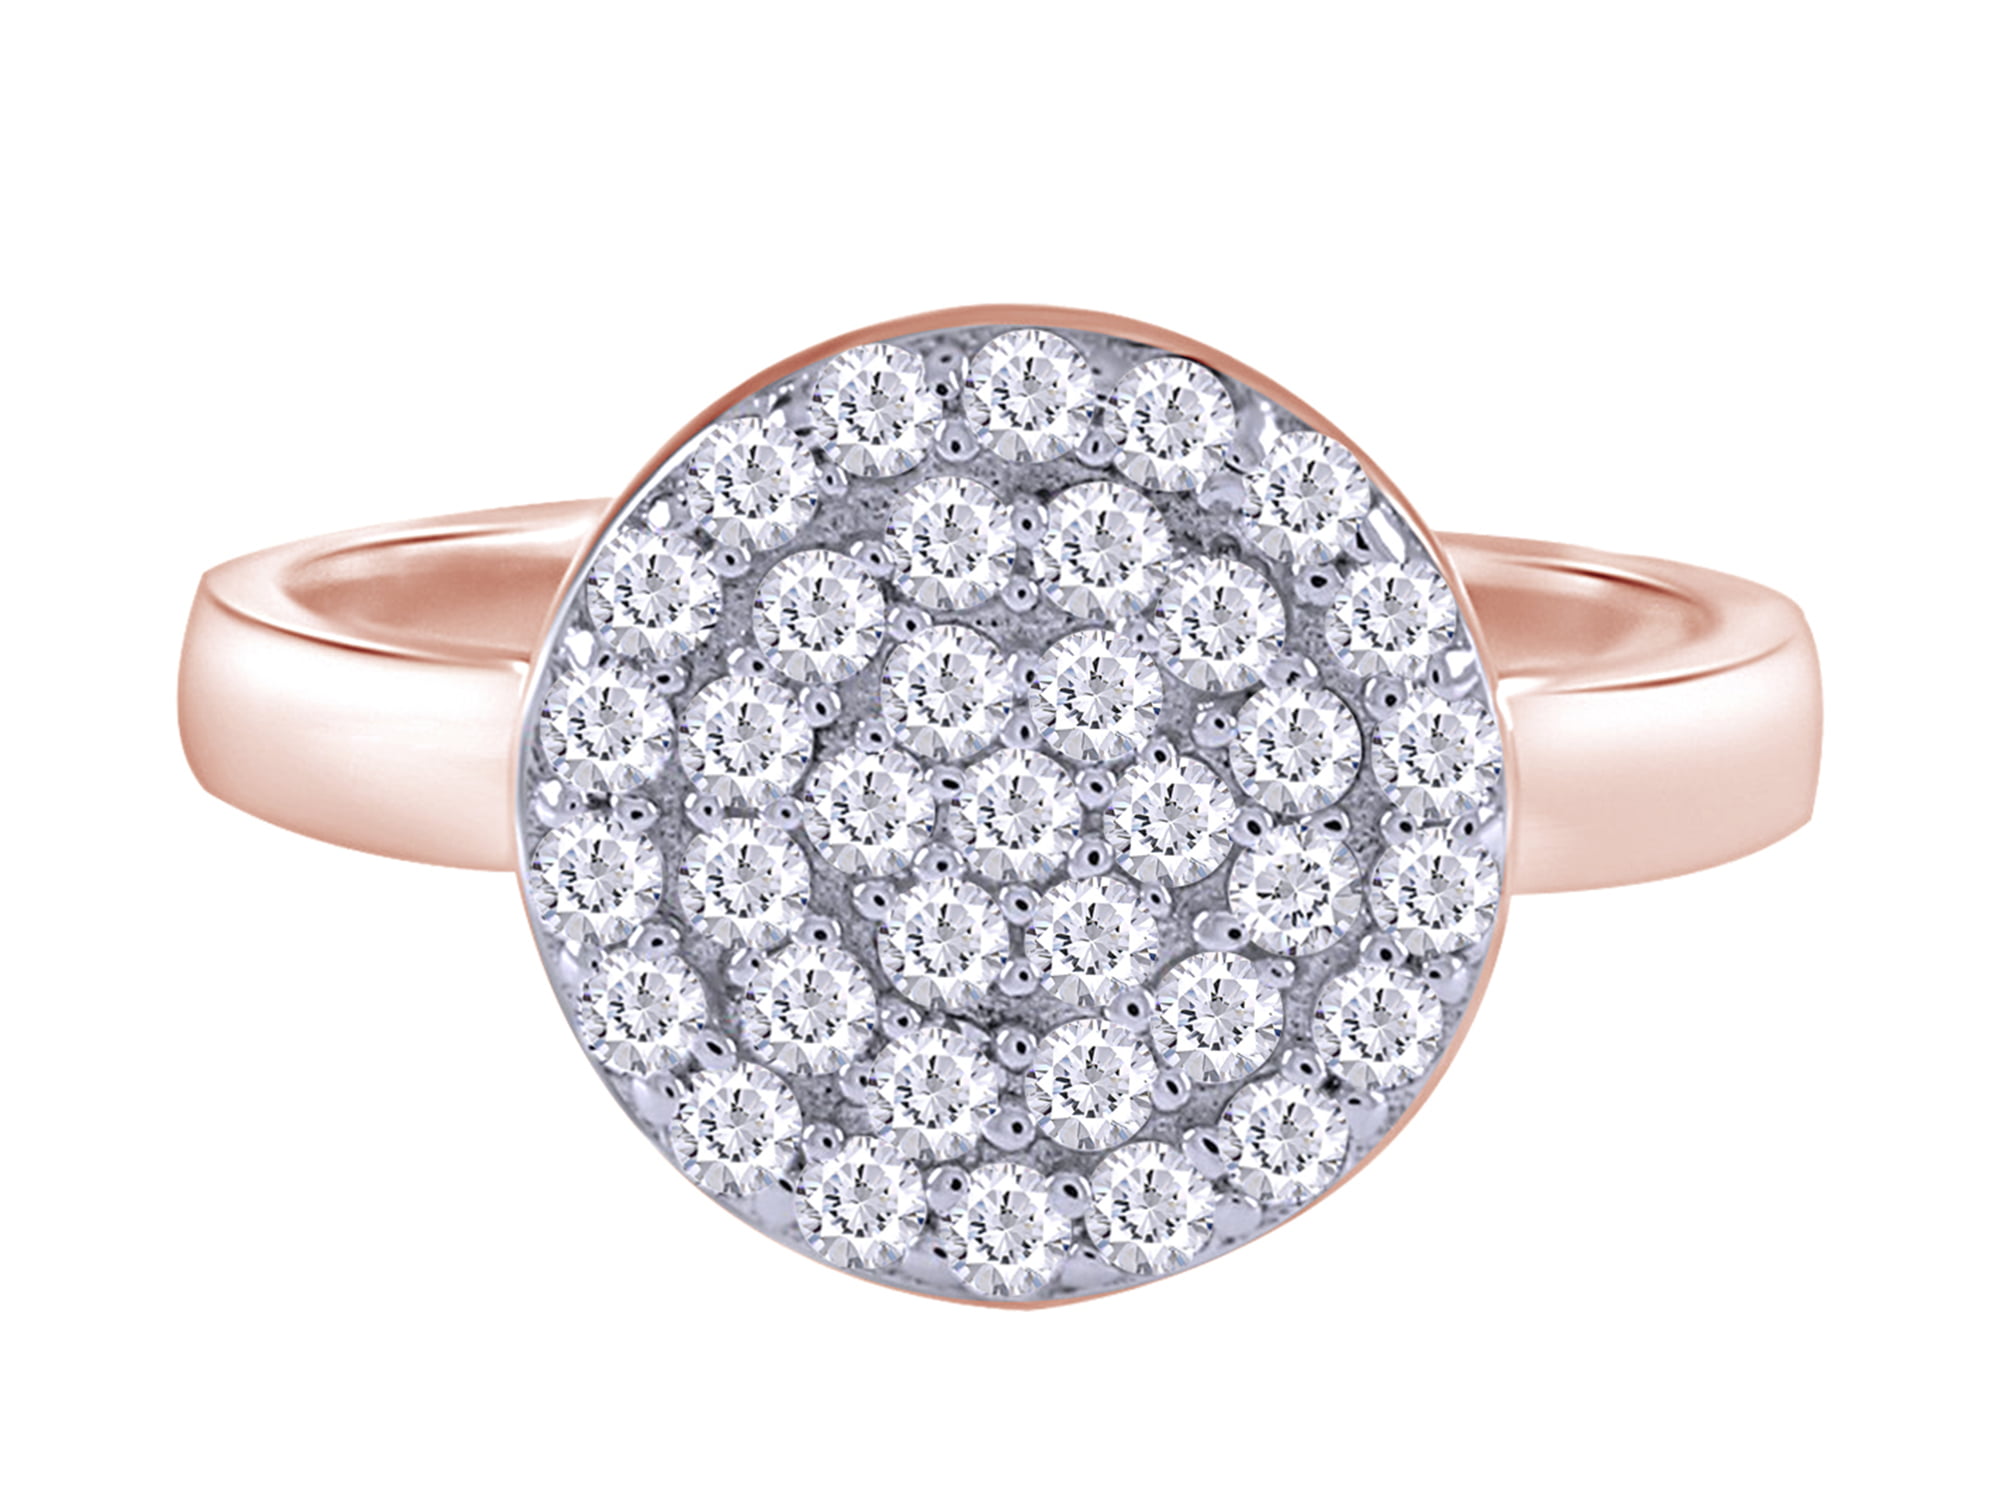 Wishrocks Round Cut White Cubic Zirconia X Criss Cross Ring in 14K Rose Gold Over Sterling Silver